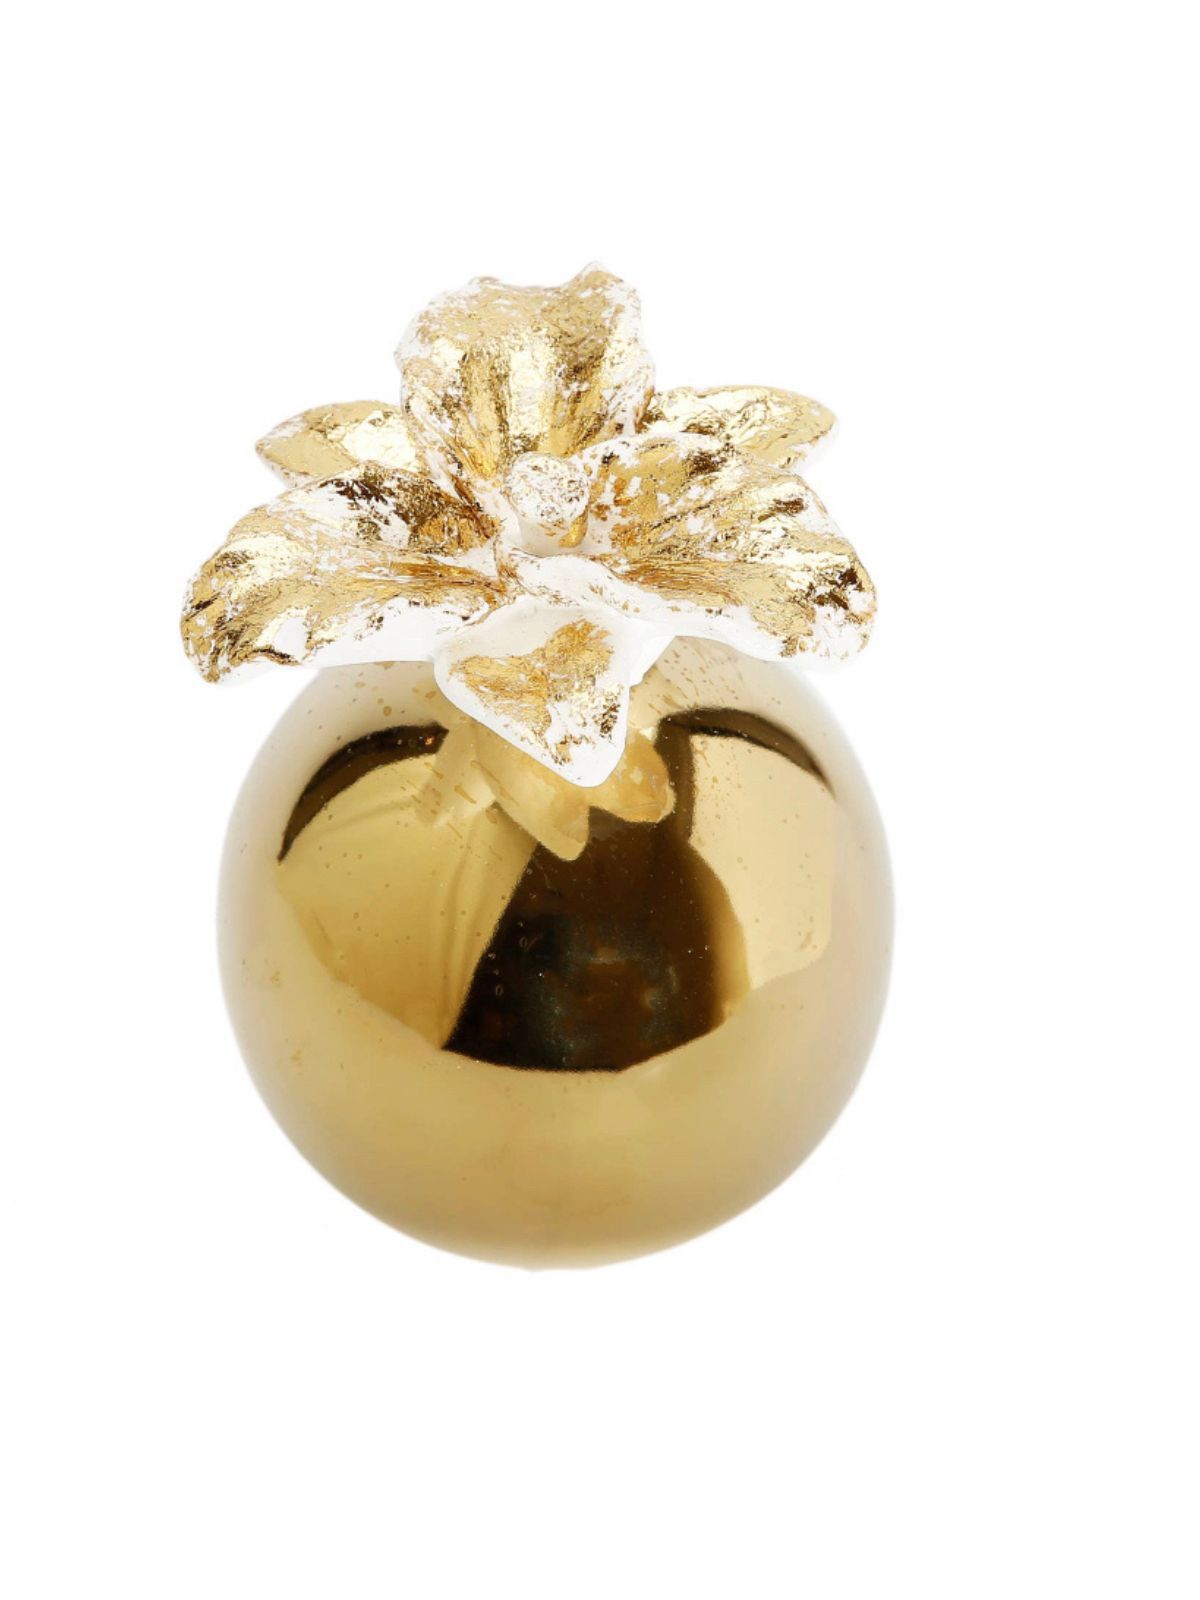 Polish Gold Sphere Shaped Ceramic Oil Diffuser with White Floral Topper with Iris and Rose scent. 